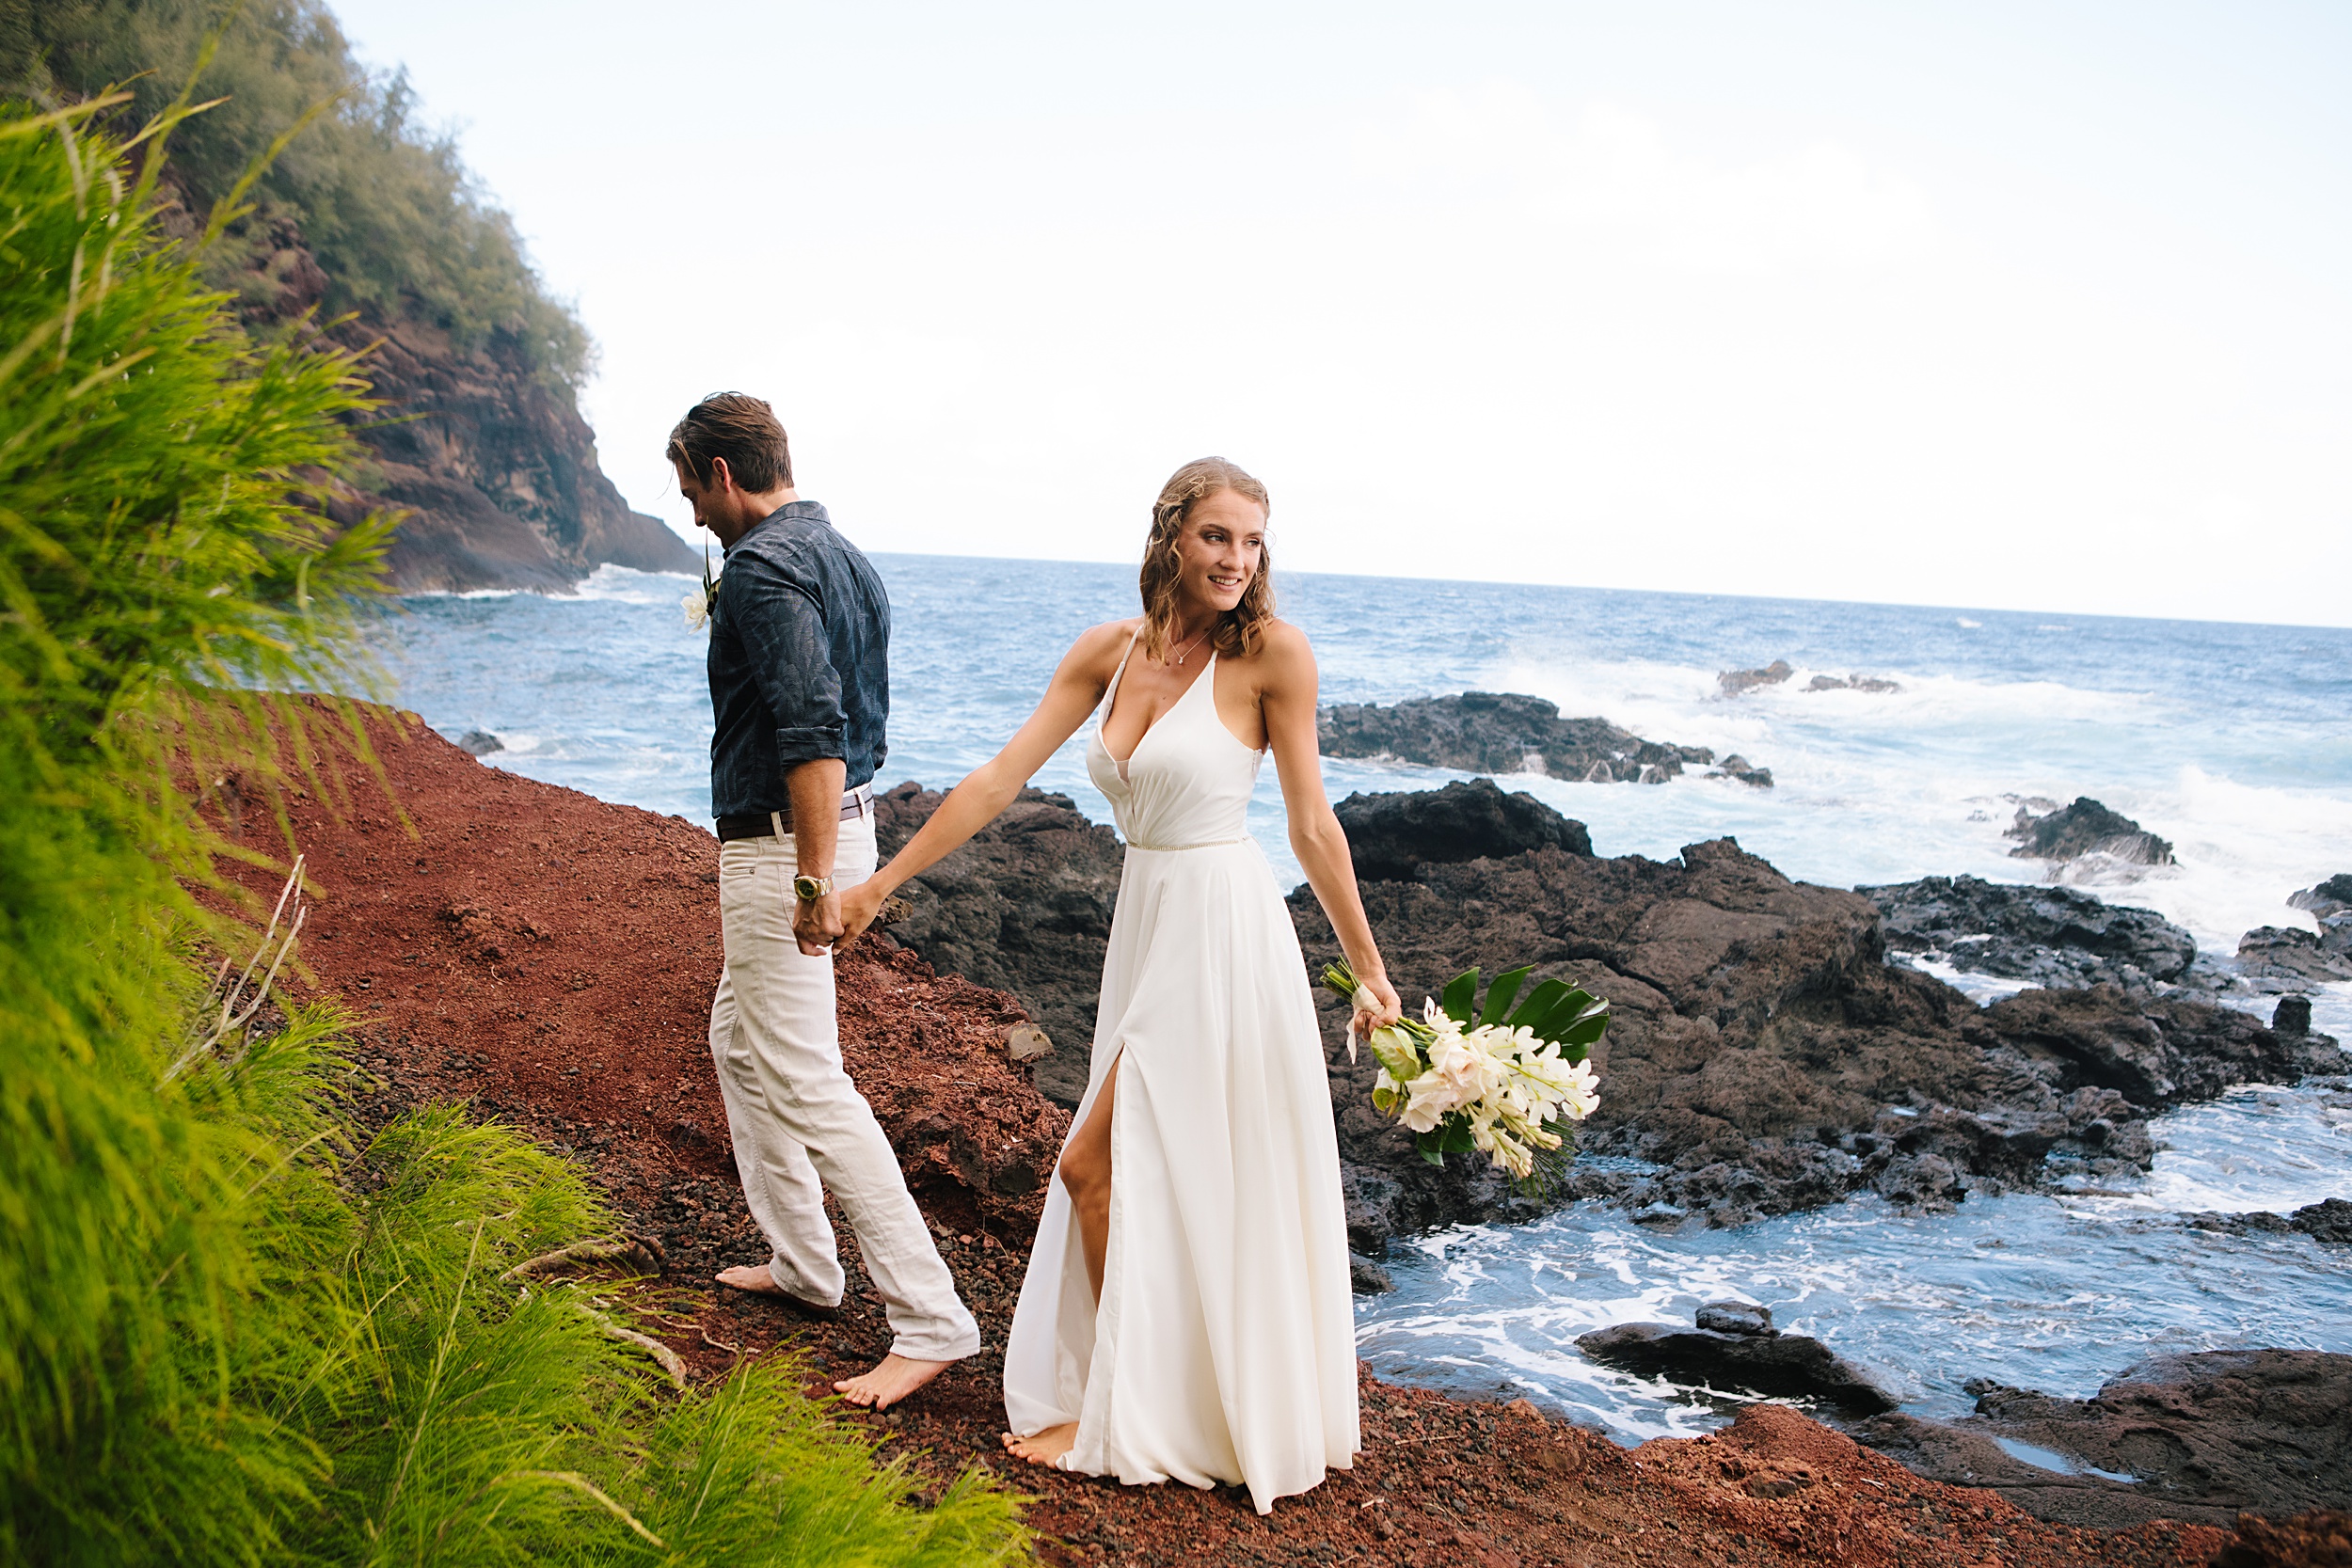 Jock-and-Audrey-6 Incredible Road trip to Hana and Red Sands Beach Elopement in Hawaii￼